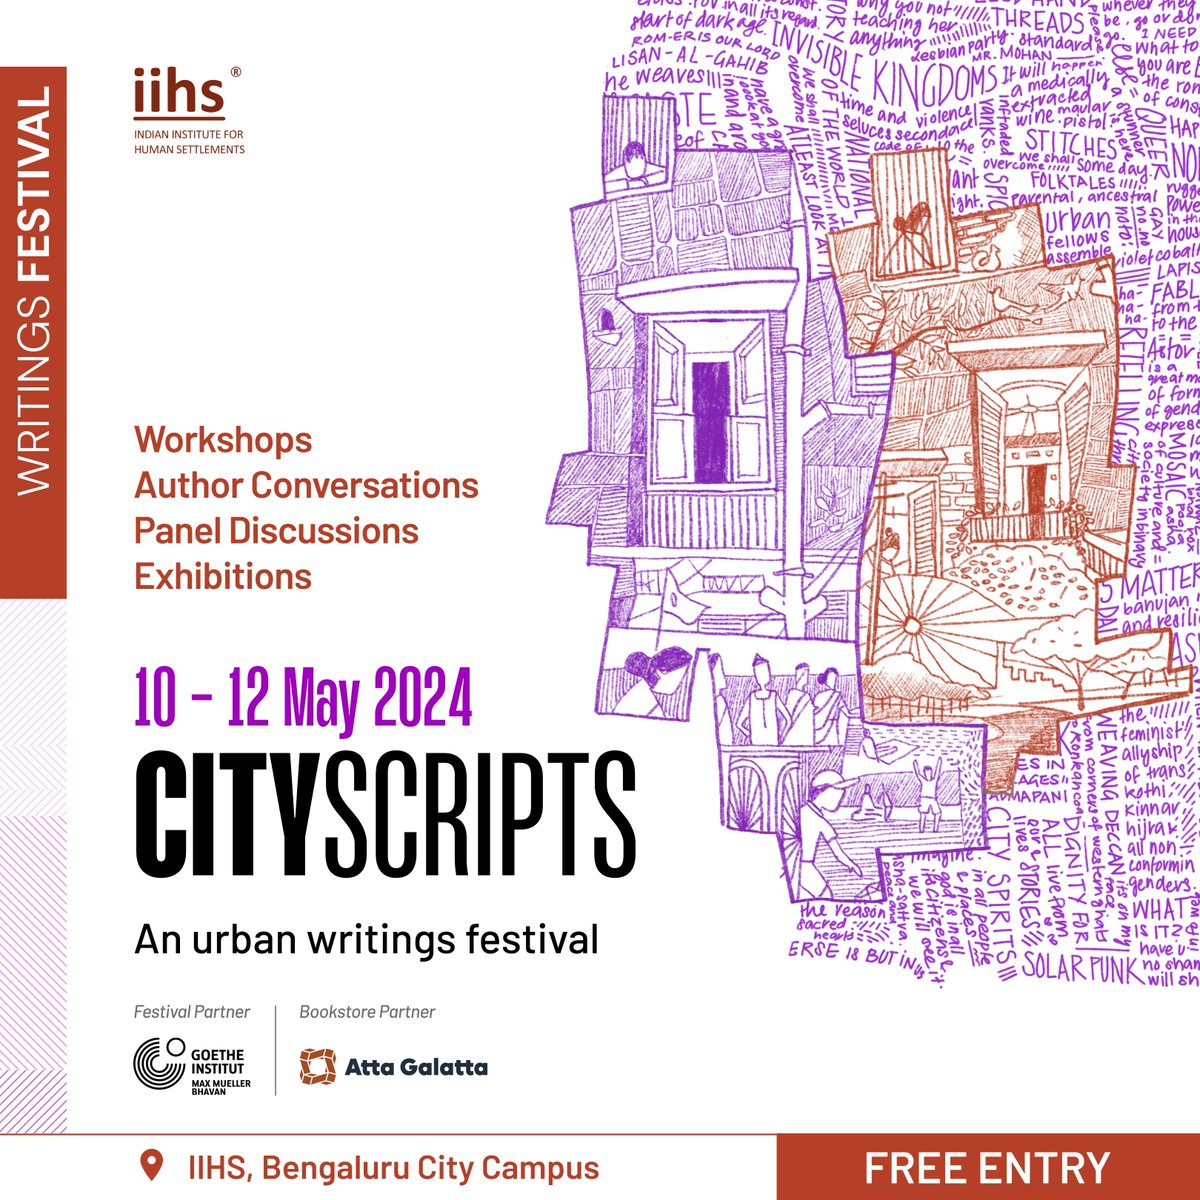 Here's what Day 1 of IIHS City Scripts 2024 looked like! Today included 2 Author in Conversations and 6 exhibitions. If you missed today, come tomorrow for a lot more! Register: bit.ly/4ahUUGm #IIHSCityScripts #CityScripts2024 #CS24 #LiteratureFestival #BangaloreEvents